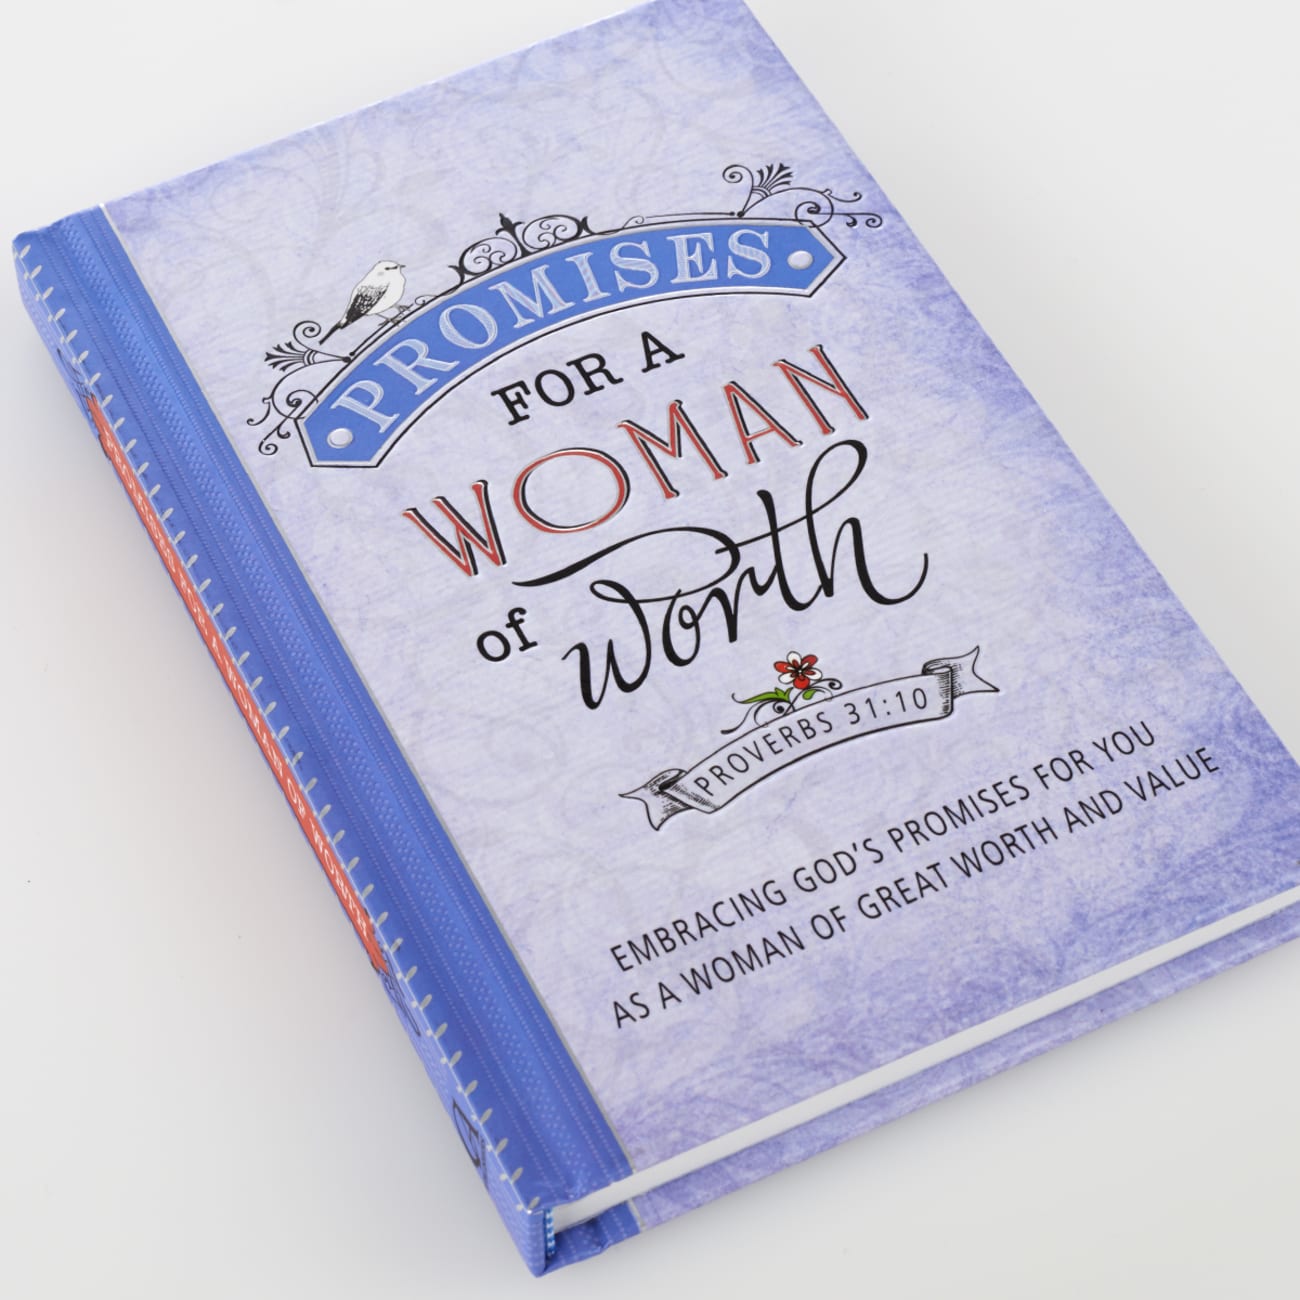 Promises For a Woman of Worth Hardback